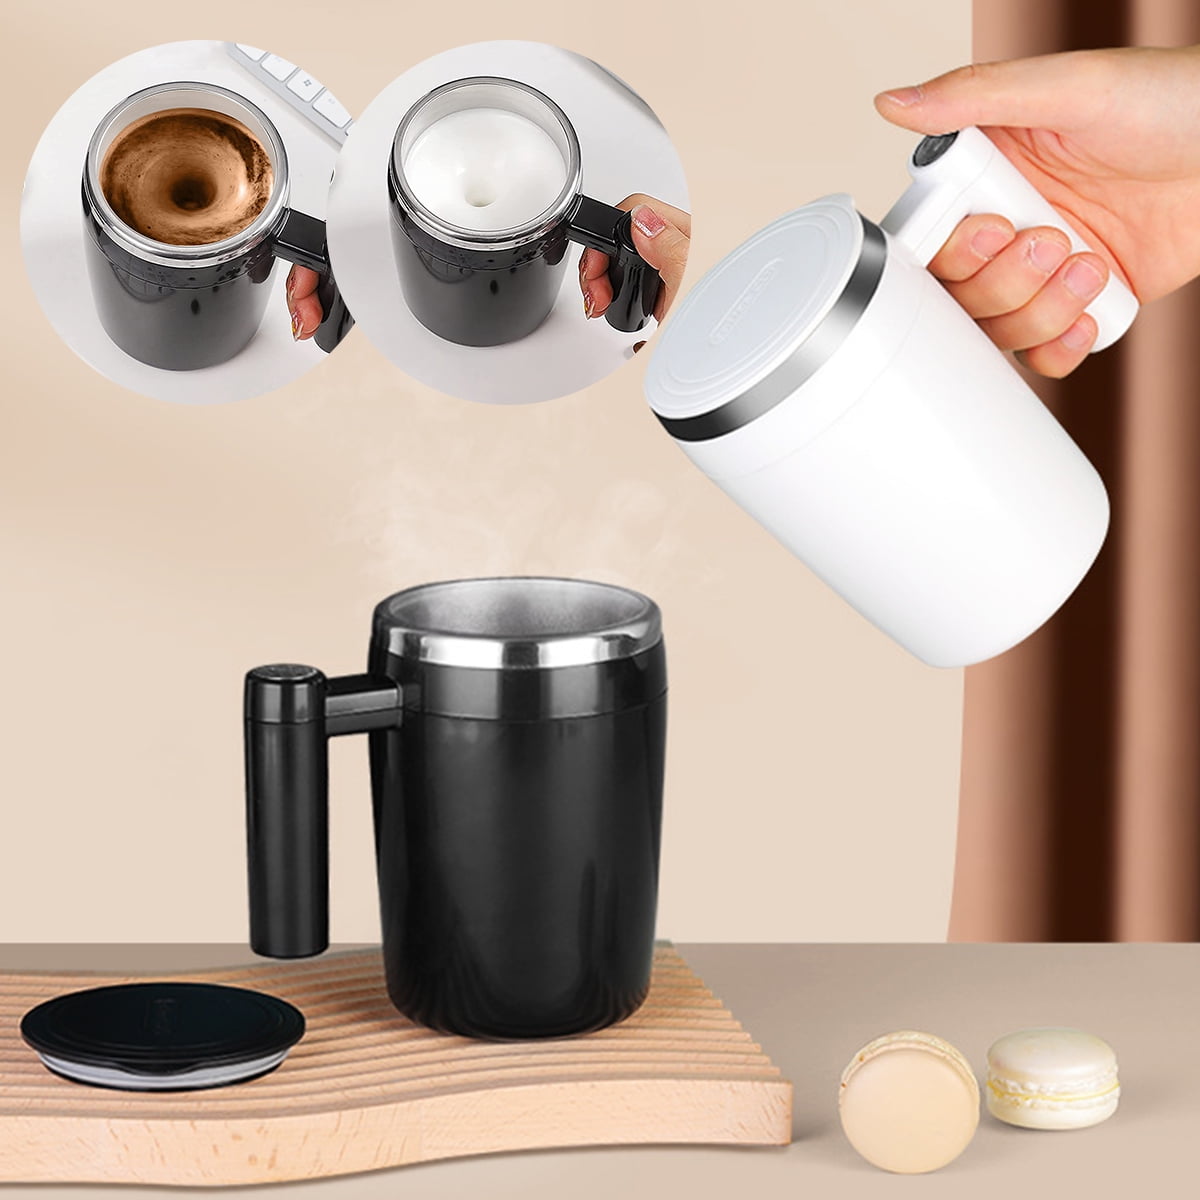 Electric Mixing Mug,Electric Stirring Coffee Mug,Coffee thermos,  Coffee Mugs,Suitable for Coffee, Milk, Cocoa and Other Beverages  (grey-white): Espresso Cups